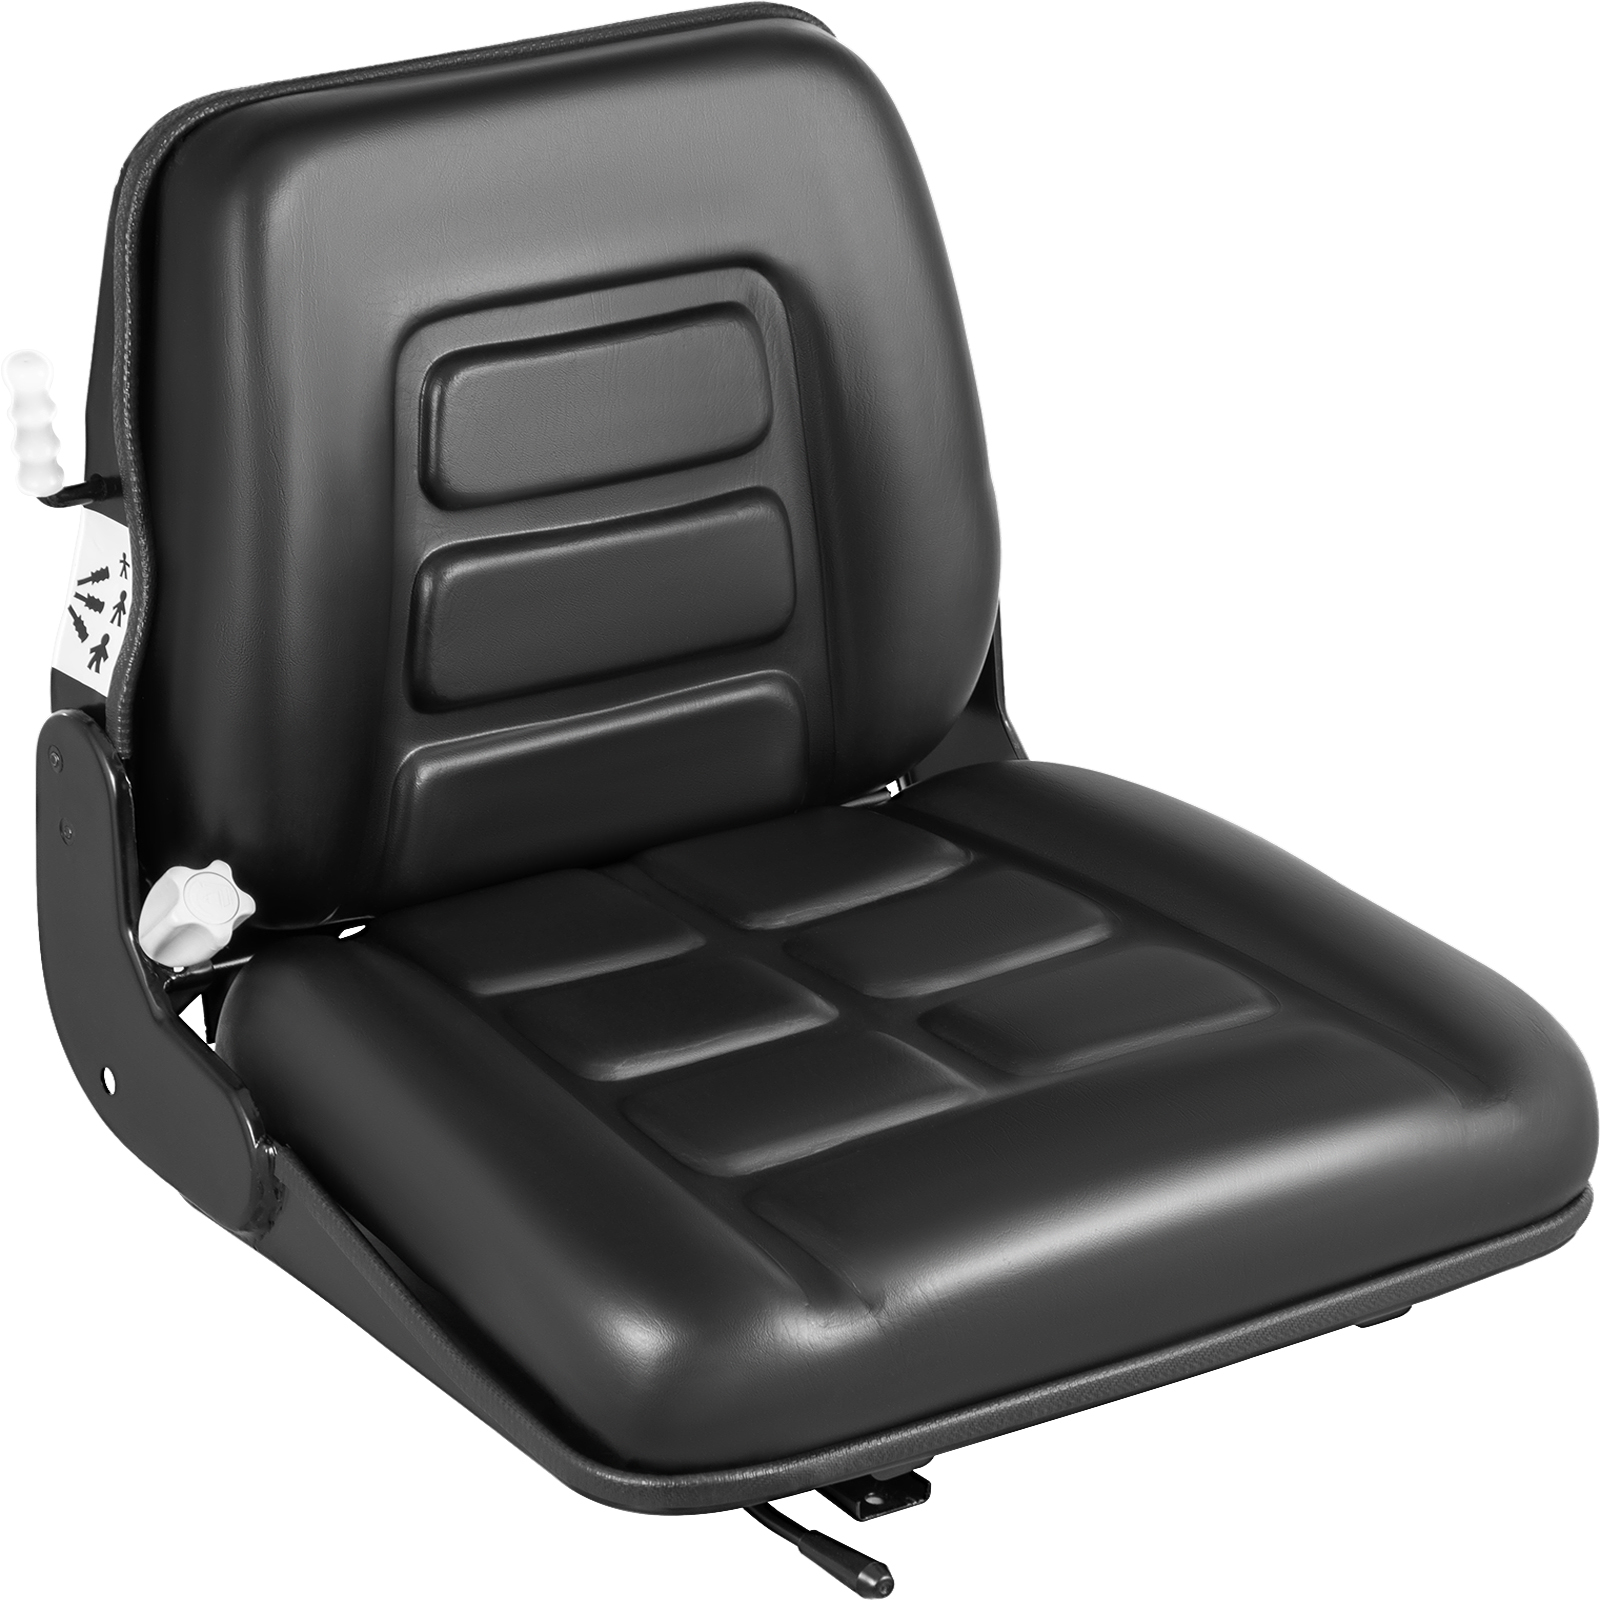 https://d2qc09rl1gfuof.cloudfront.net/product/CCZYHSCTOYOTA6BKC/tractor-seat-replacement-m100-1.2.jpg